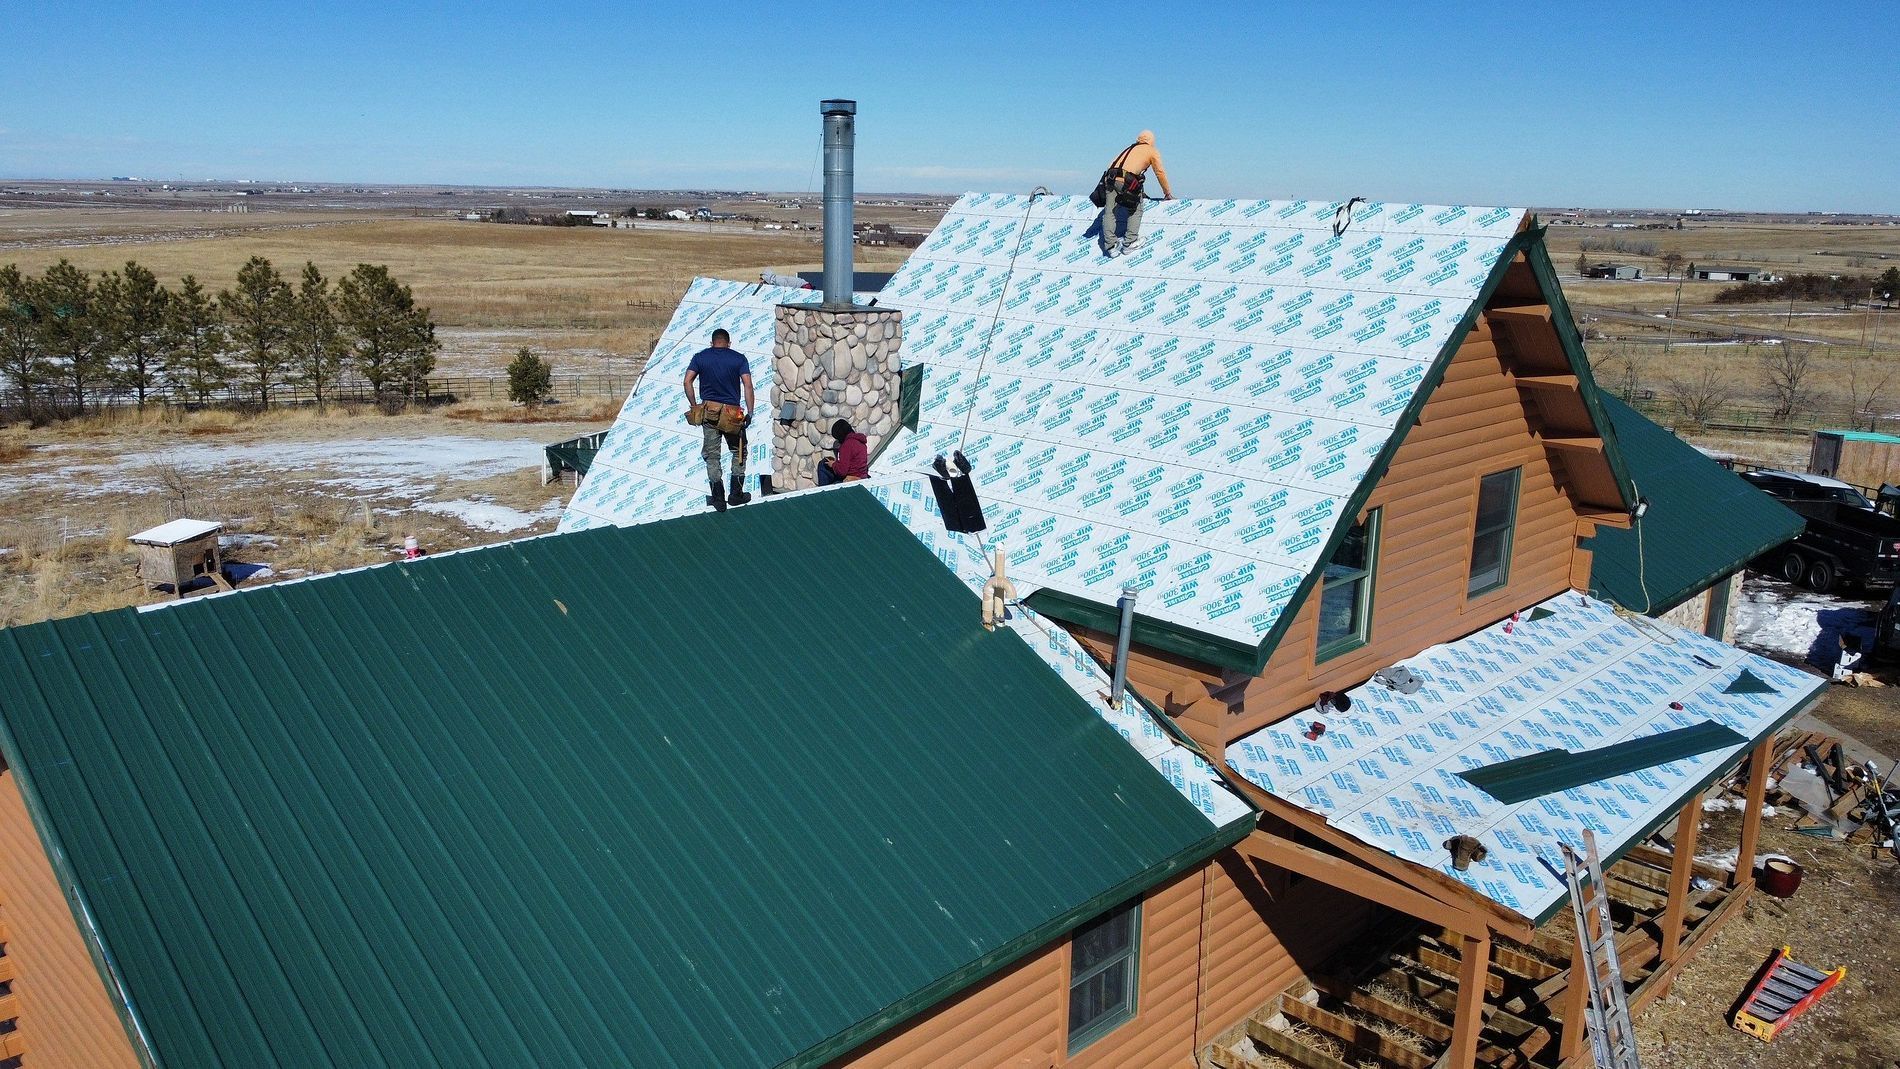 A group of people are working on the roof of a house.